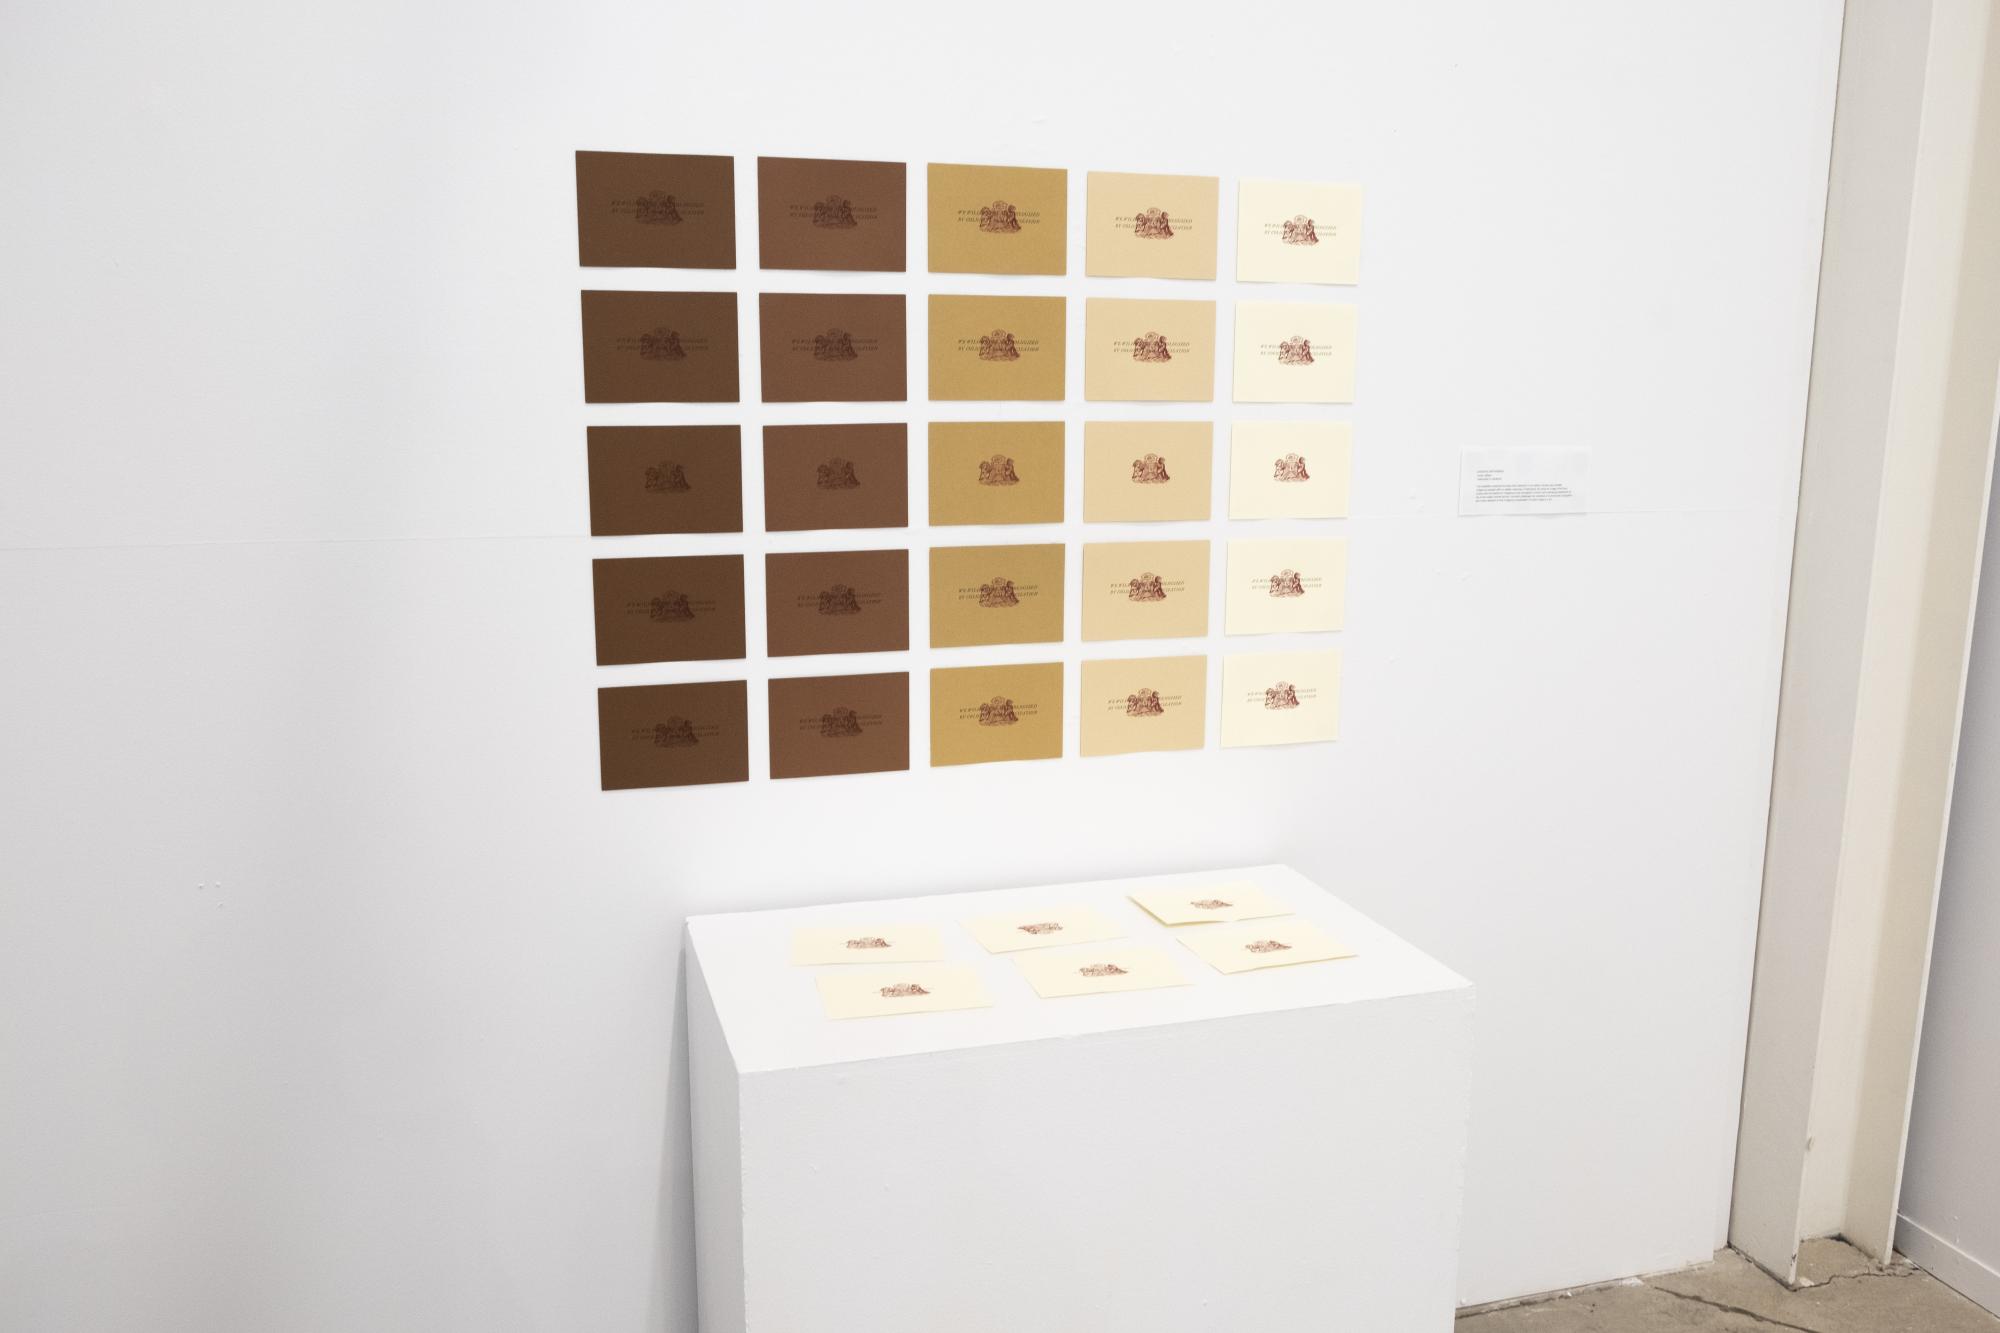 angle view of the prints arranged in a grid on the wall and some prints on a plinth in front of the wall